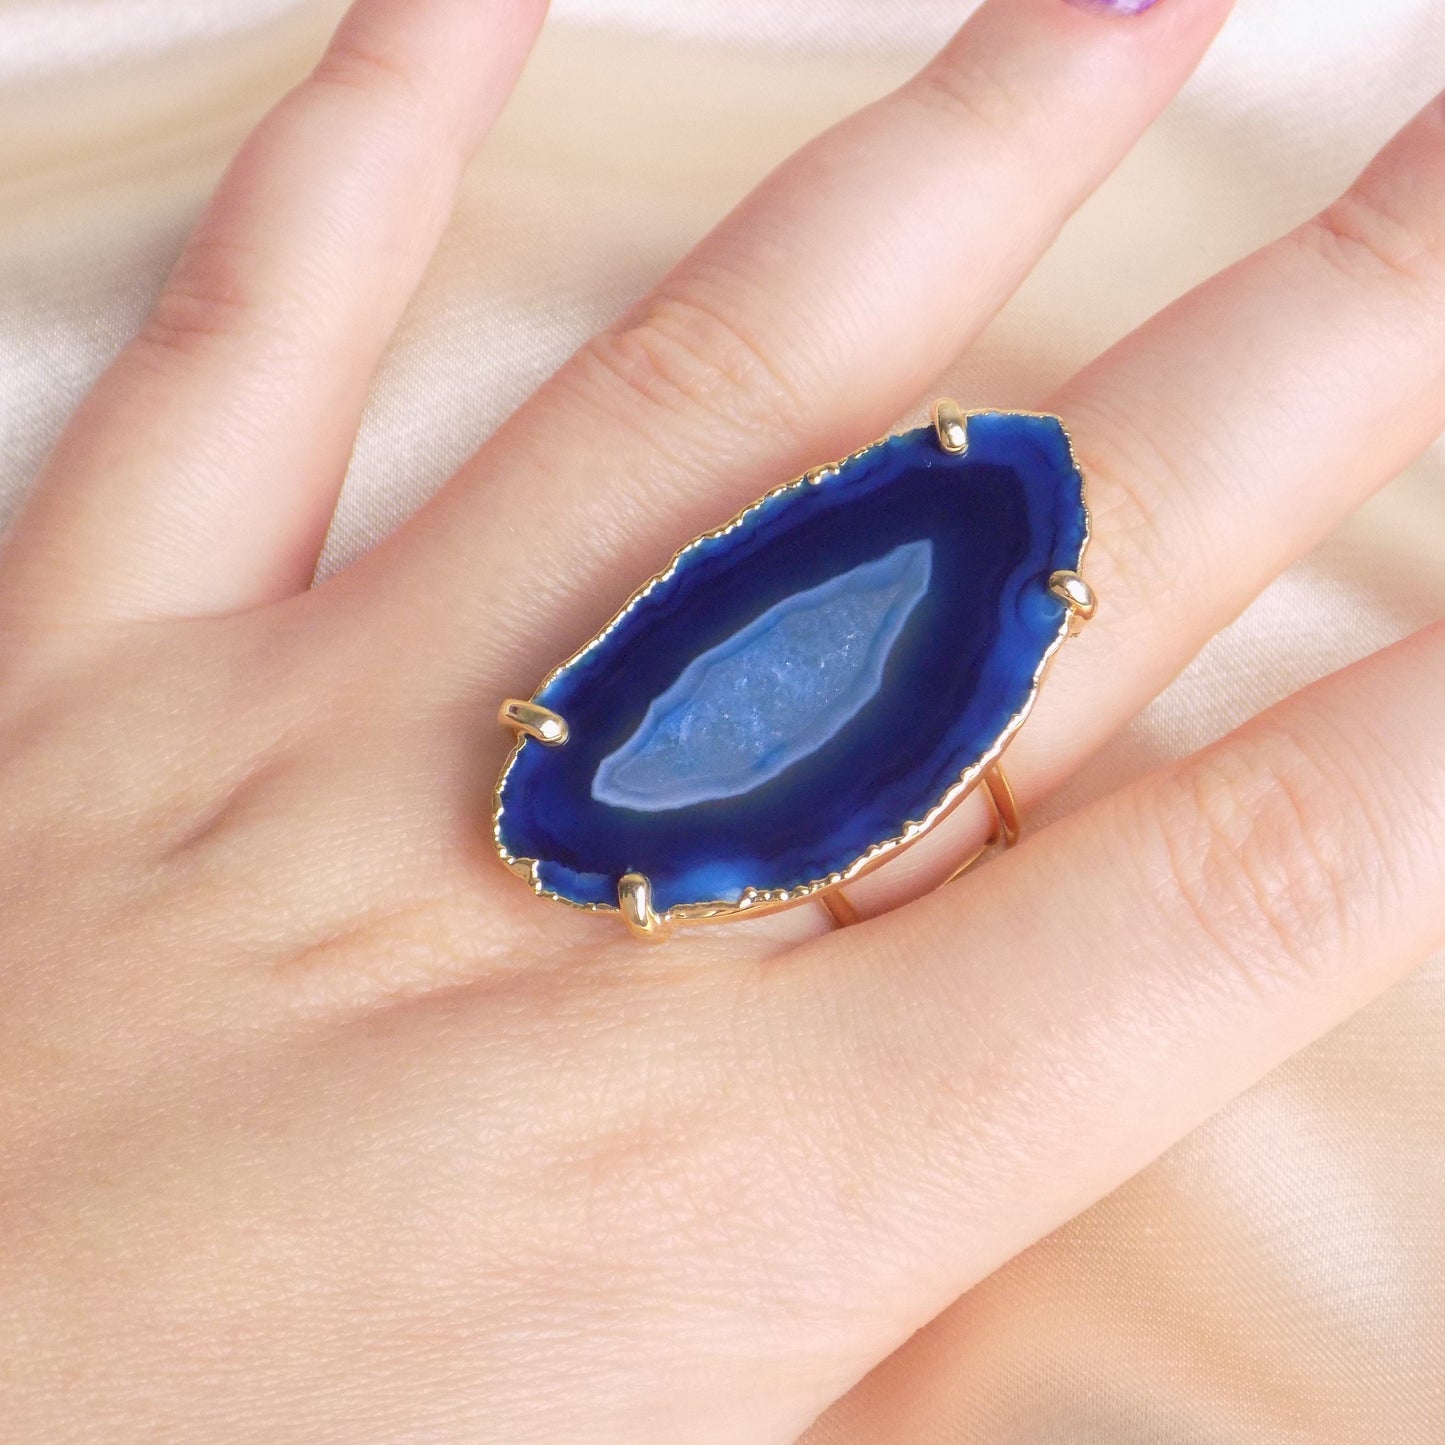 Gifts For Her, Large Blue Agate Slice Natural Gemstone Ring Gold Dipped Adjustable, G15-189